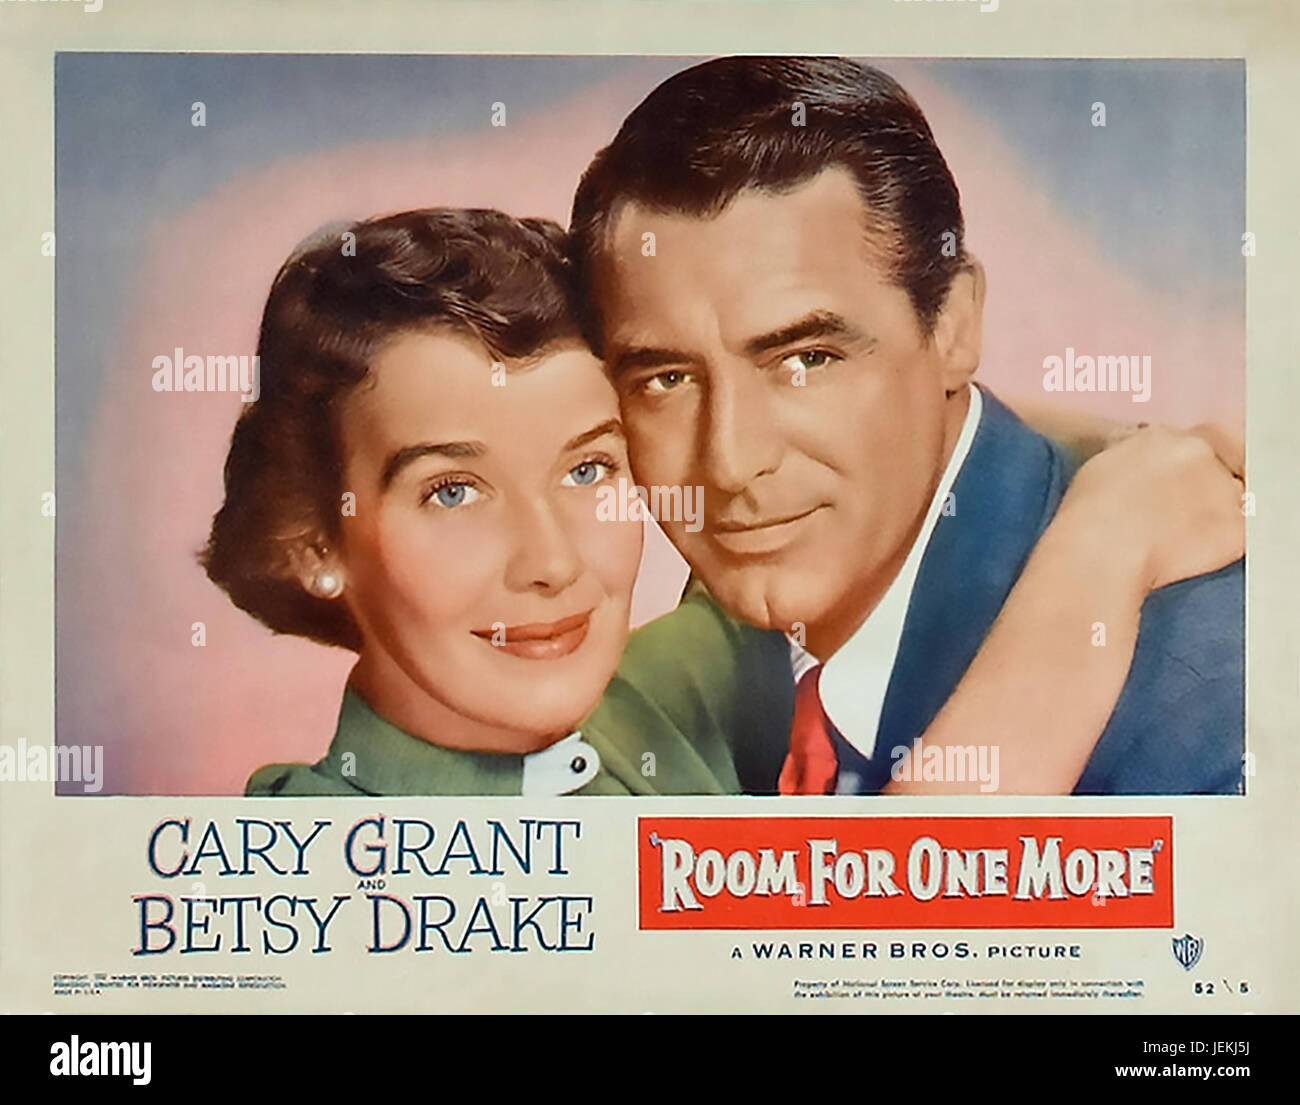 ROOM FOR ONE MORE 1952 Warner Bros Film mit Betsy Drake und Cary Grant Stockfoto